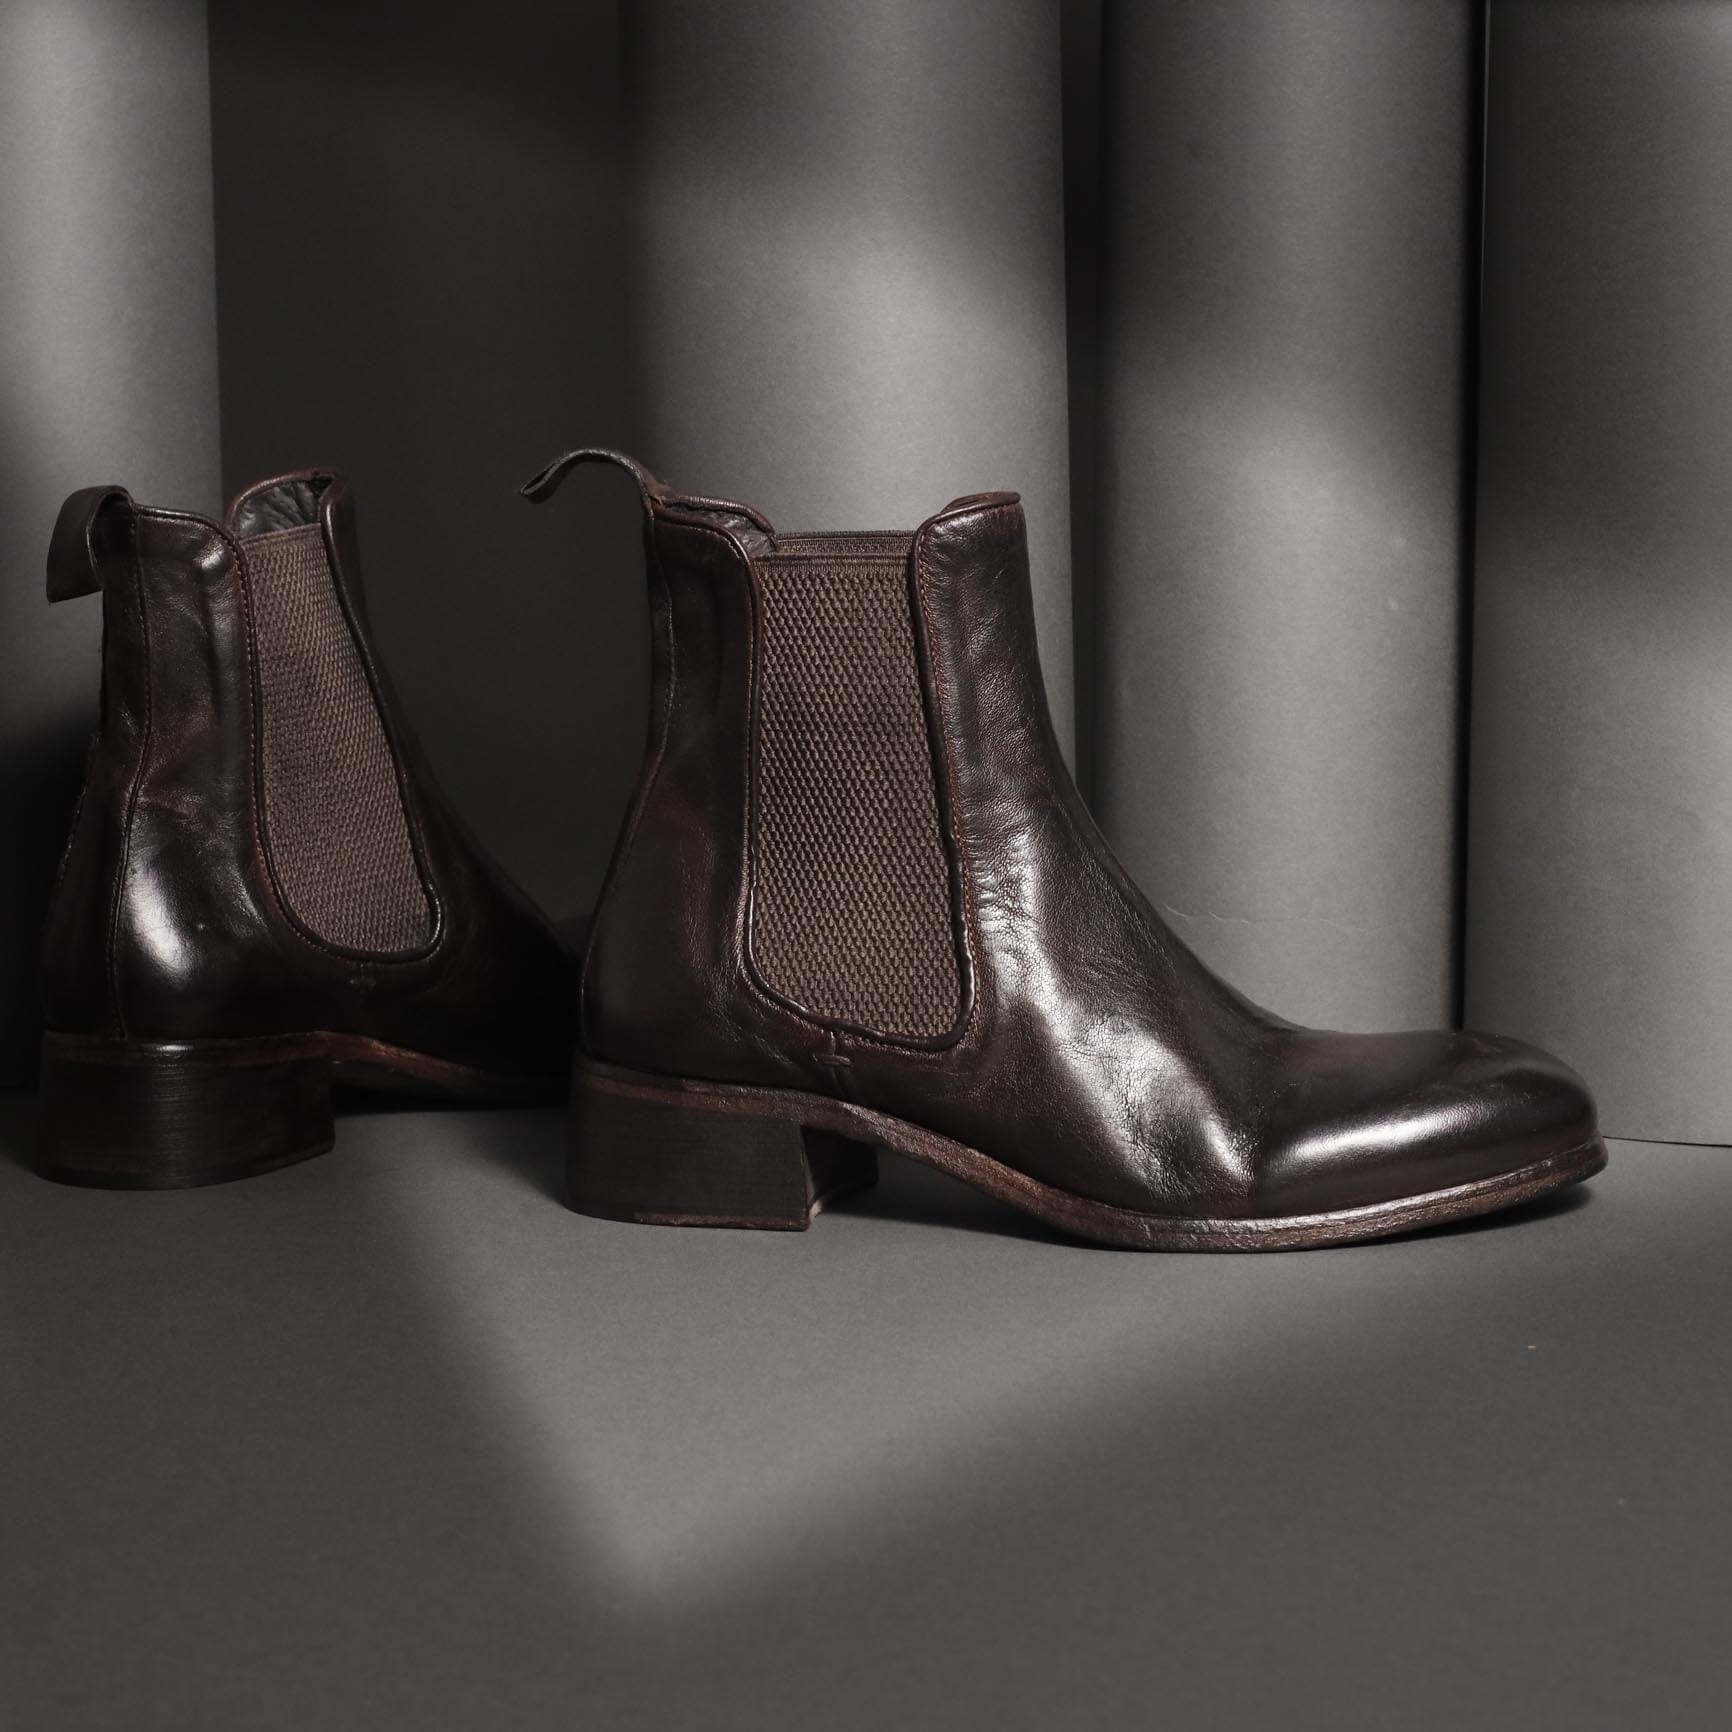 Conflict For Interest Womens Chelsea Boot Conflict For Interest Giorgia Brown